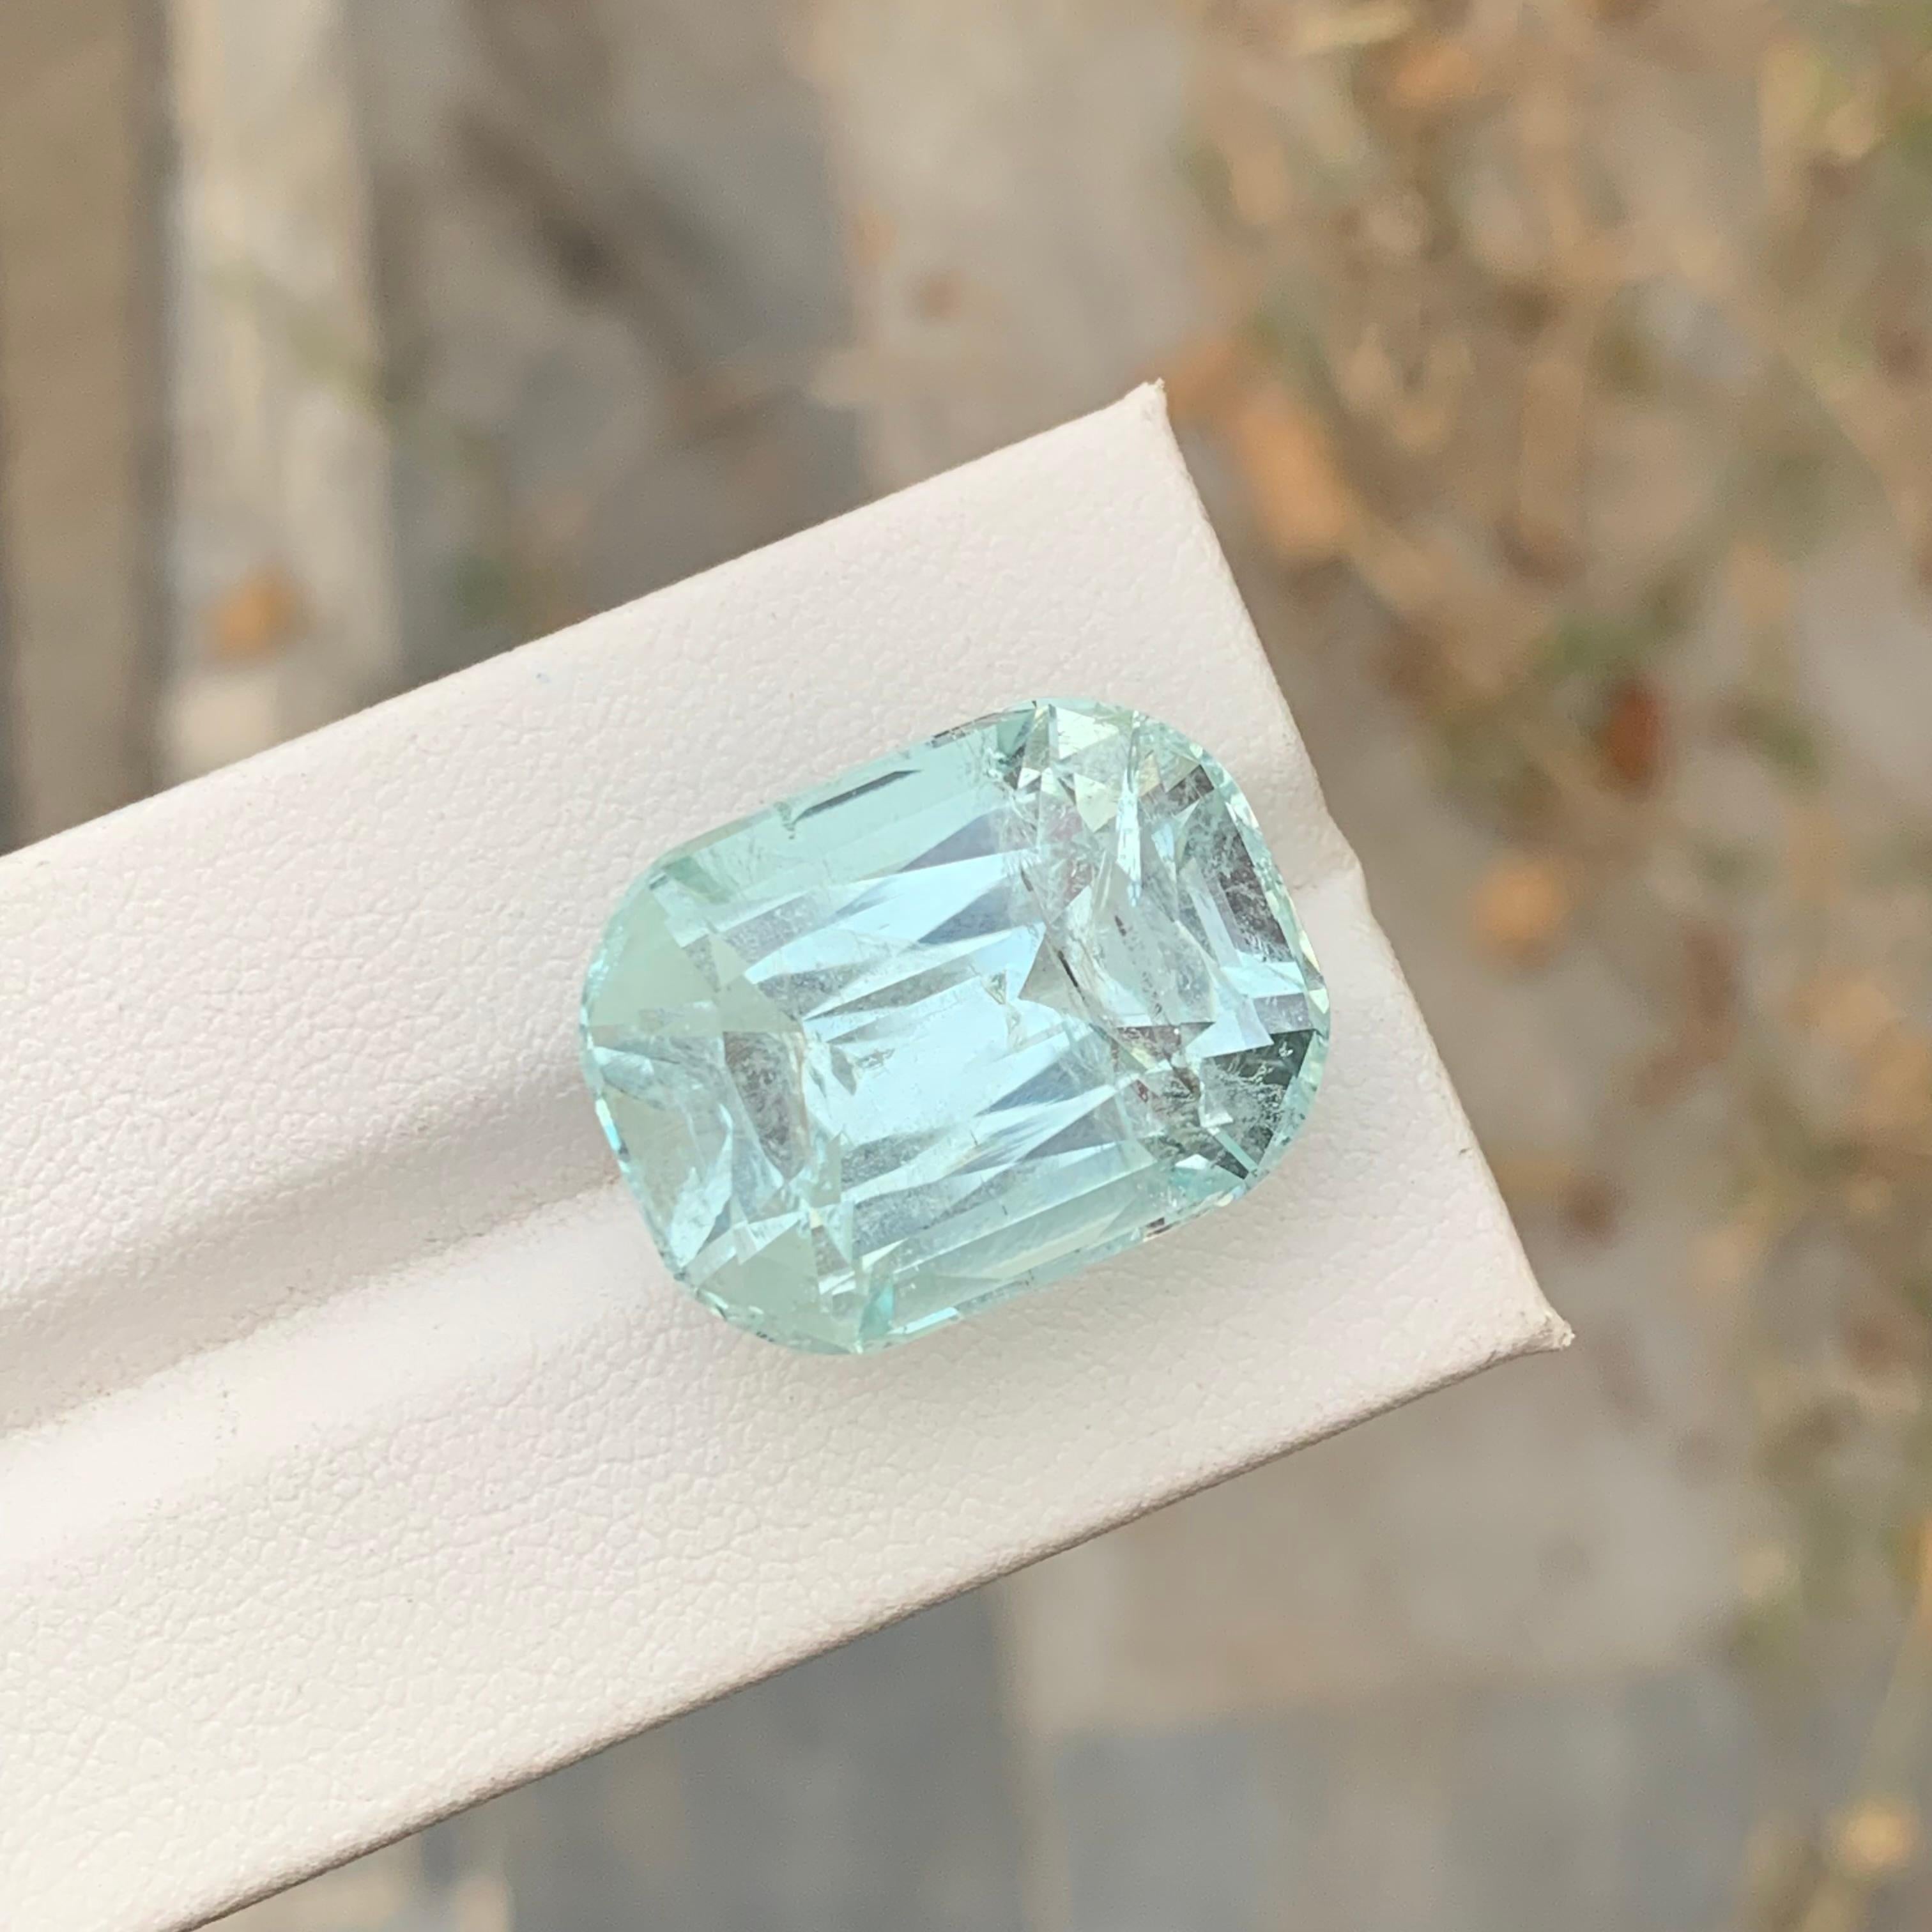 Cushion Cut 29.75 Carats Gigantic Natural Loose Aquamarine Included Gem For Necklace Jewelry For Sale